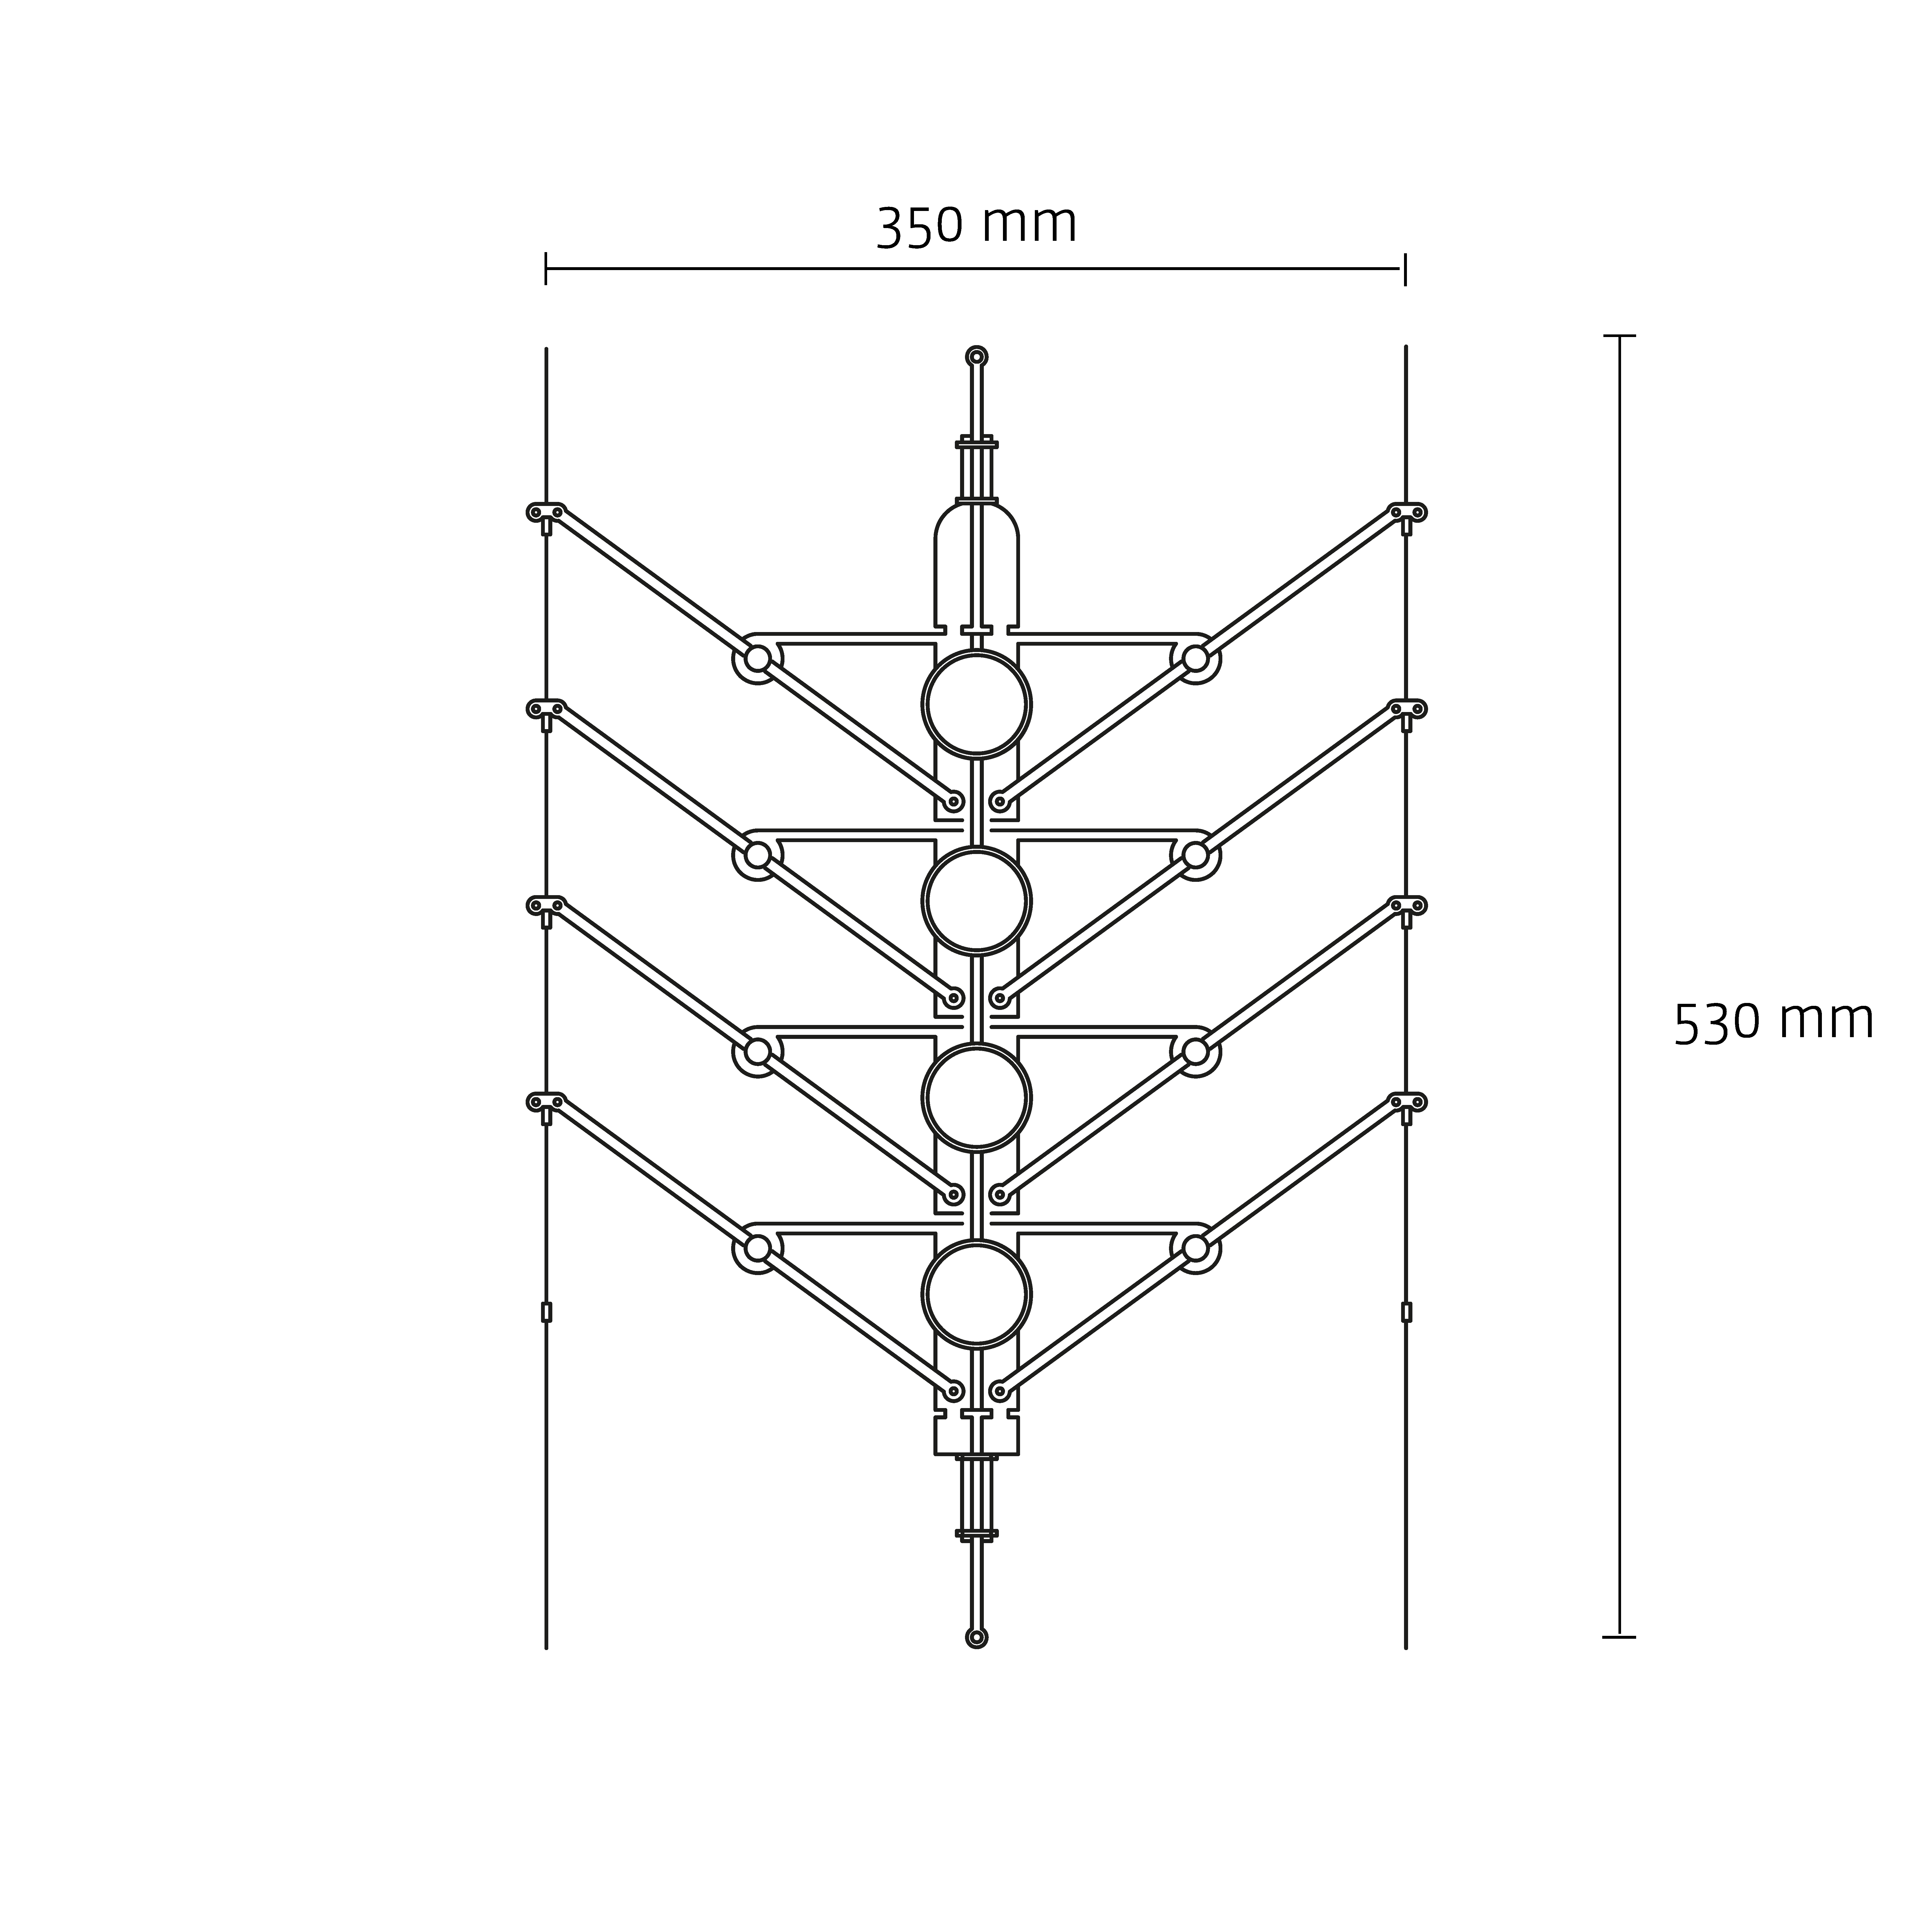 Technical drawing of VANTOT's VVV. a modular LED light concept that redefines the possibilities of illumination. Created with the support of DCW Editions.